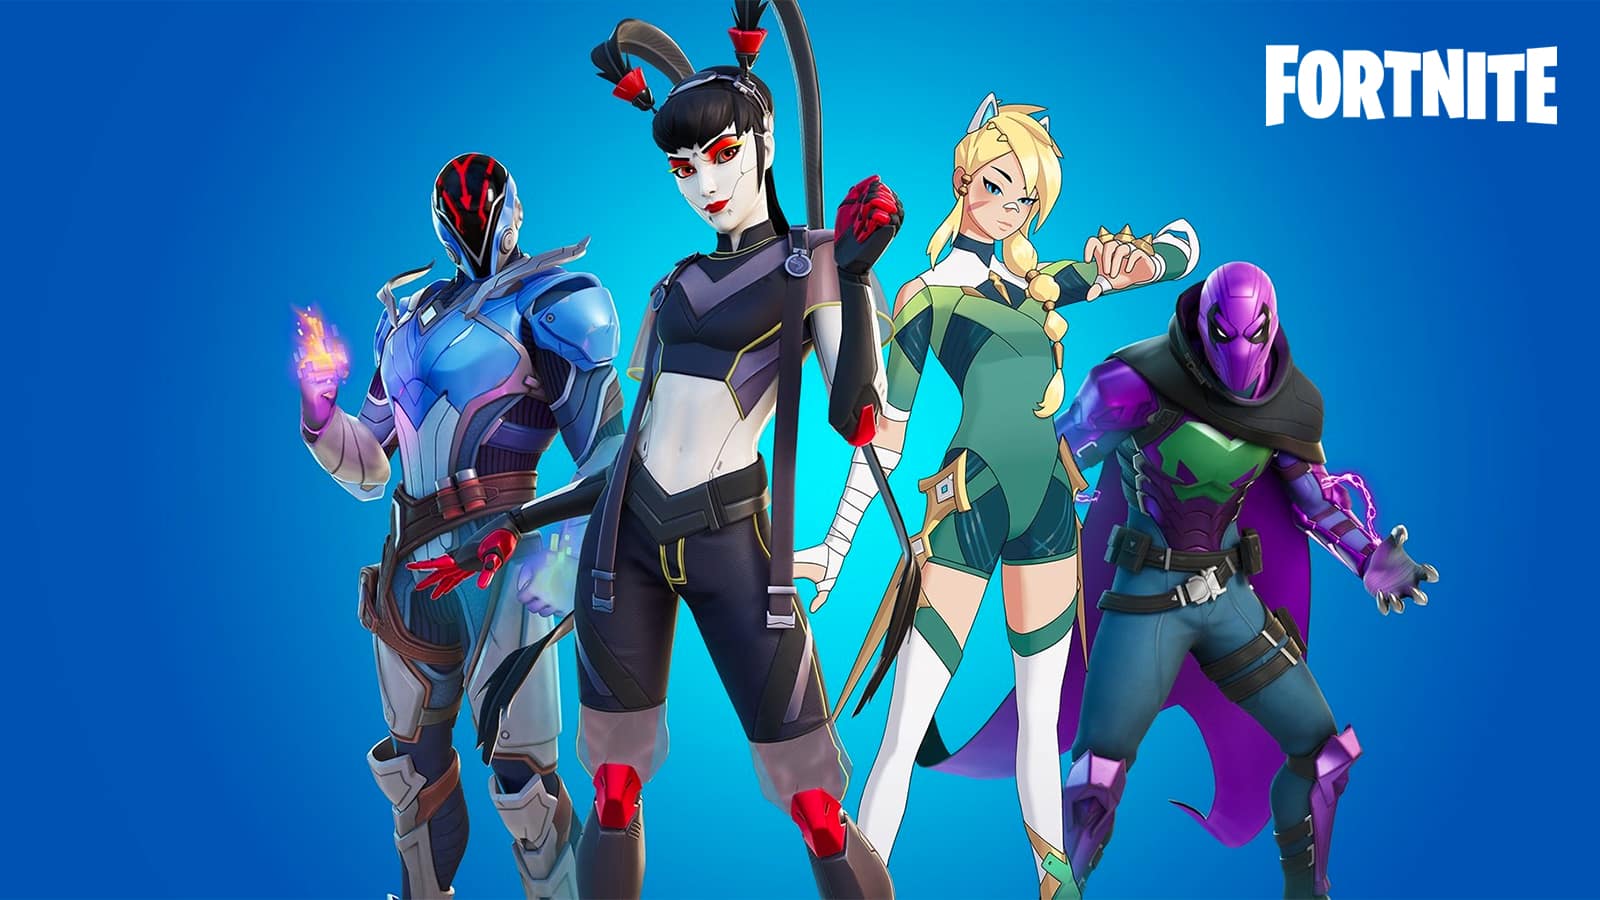 Fortnite cross platform guide: Playing across platforms - Android